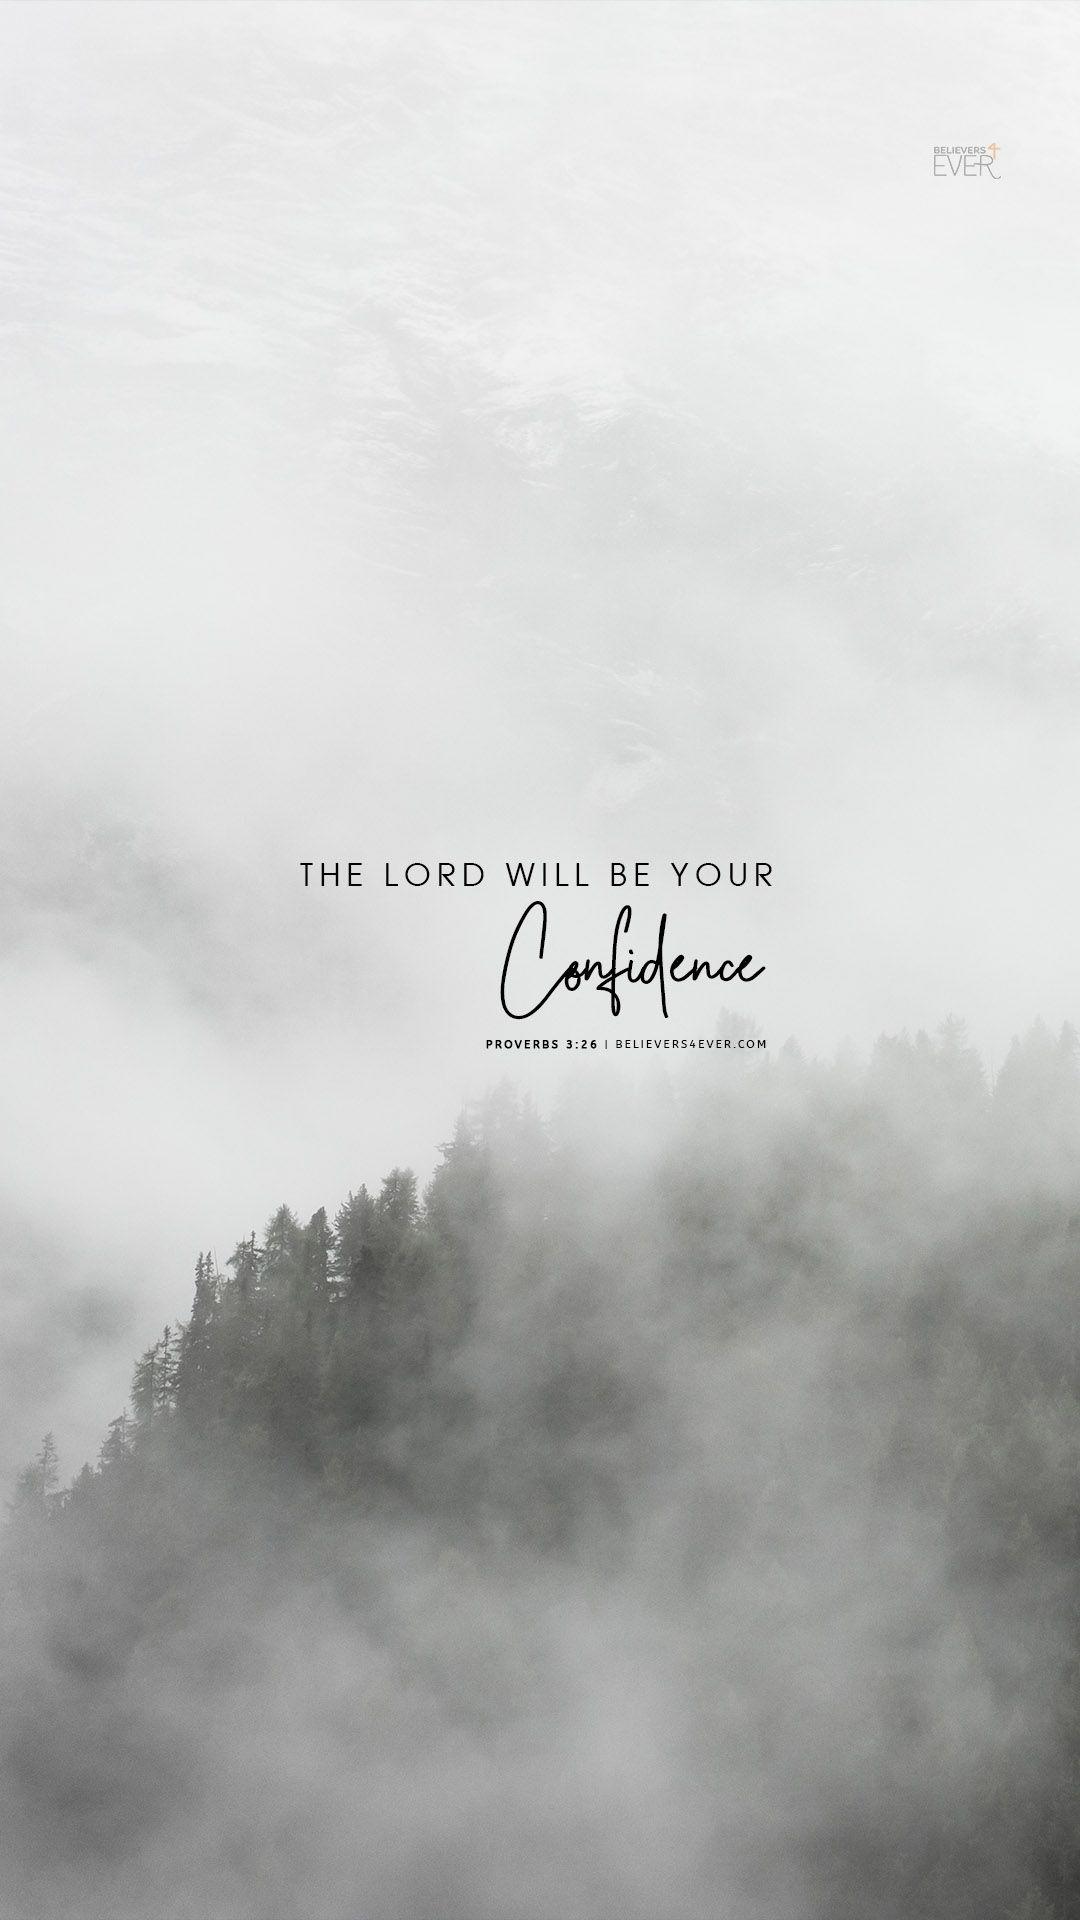 The Lord will be your confidence. Bible quotes about faith